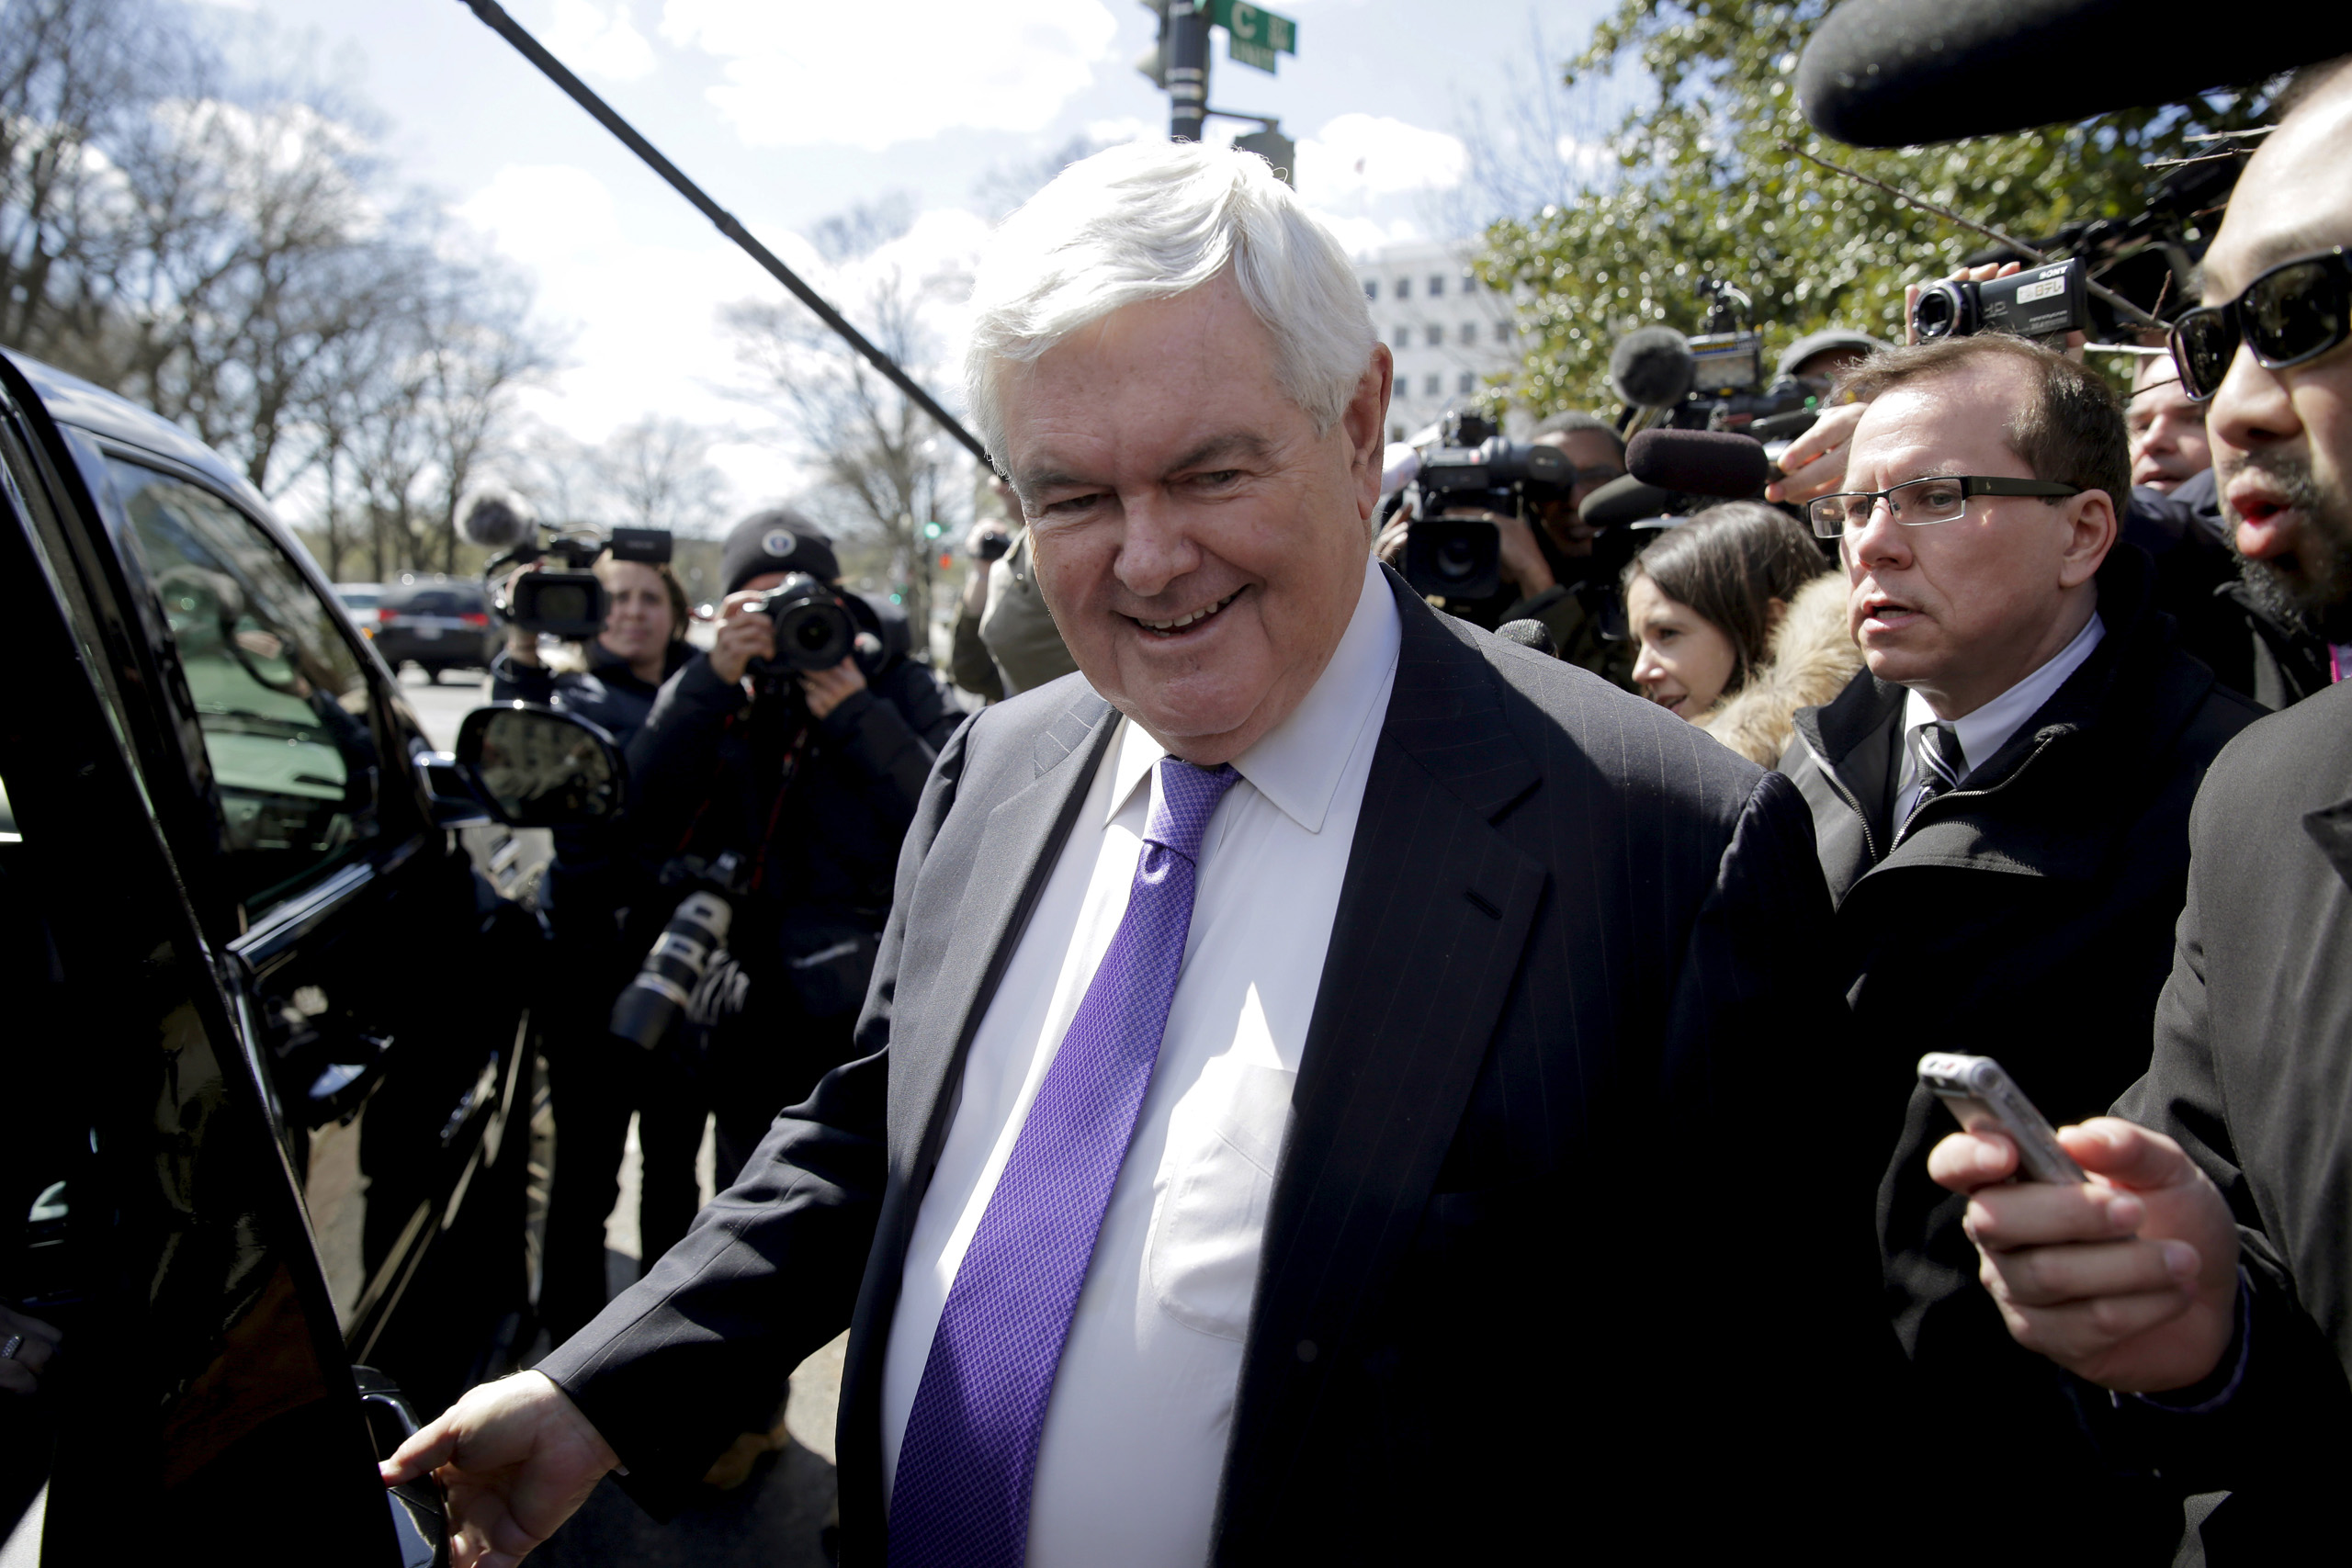 Former Speaker of the House Gingrich is followed by the media as he walks from a meeting with Republican presidential candidate Donald Trump in Washington